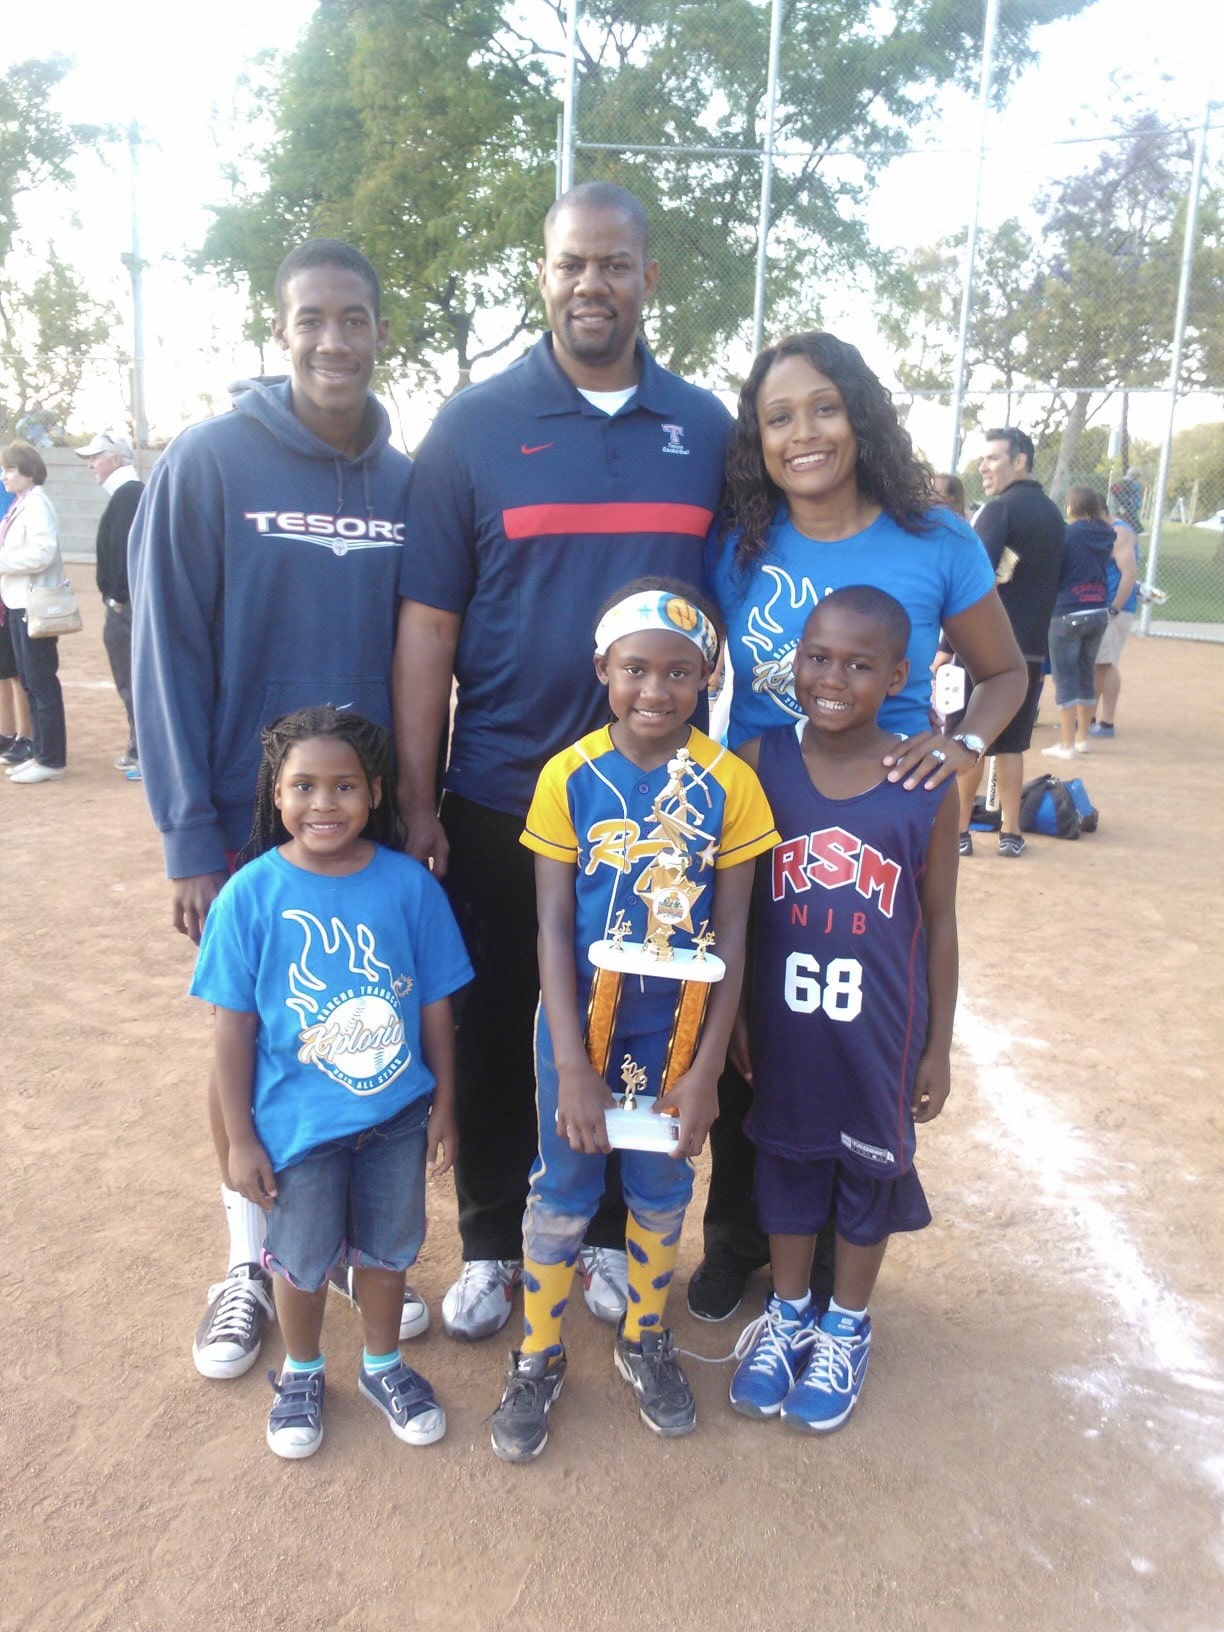 A young Maya holds her softball  trophy in this family photo